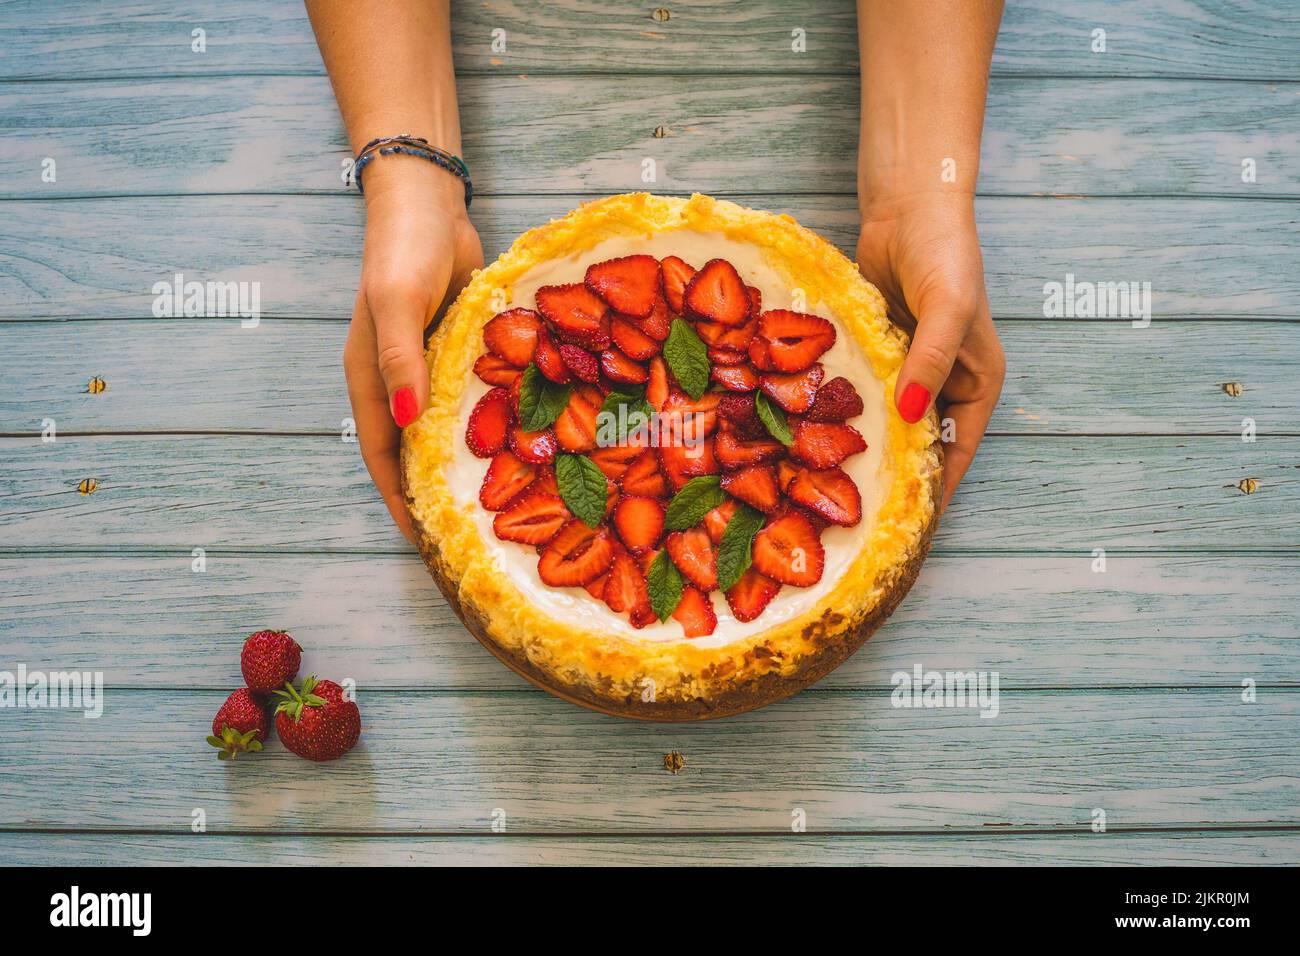 Strawberry homemade cake on wooden table. Woman hand holding delicious cheesecake with strawberries decorated with mint leaves.Top view.Healthy organi Stock Photo